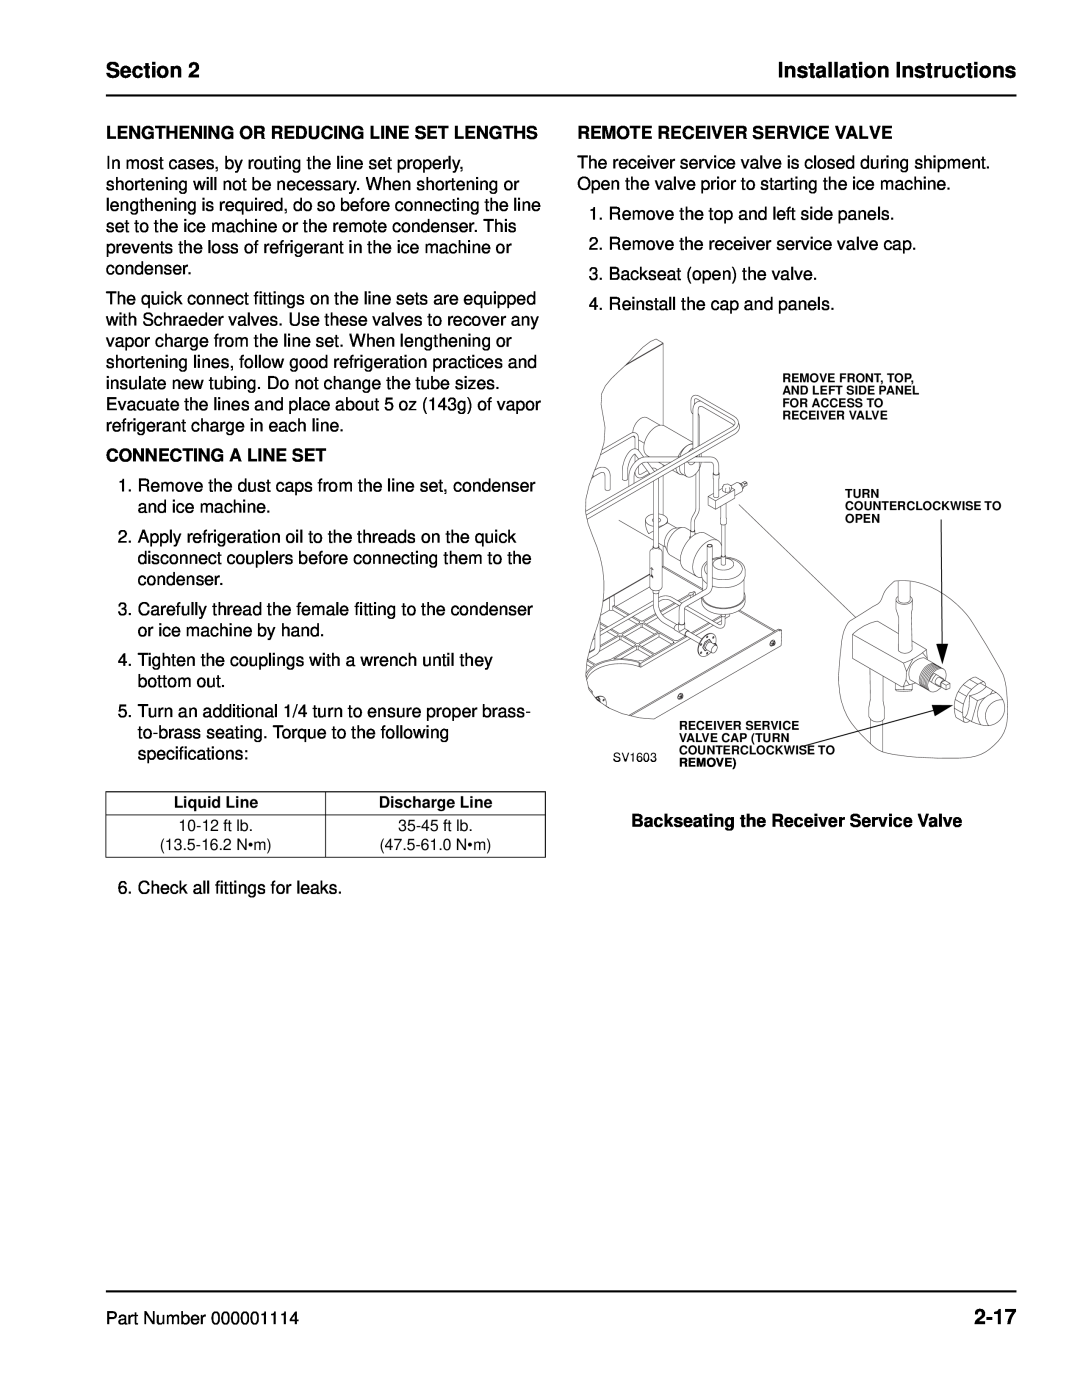 Manitowoc Ice Q manual 2-17, Lengthening Or Reducing Line Set Lengths, Connecting A Line Set, Remote Receiver Service Valve 